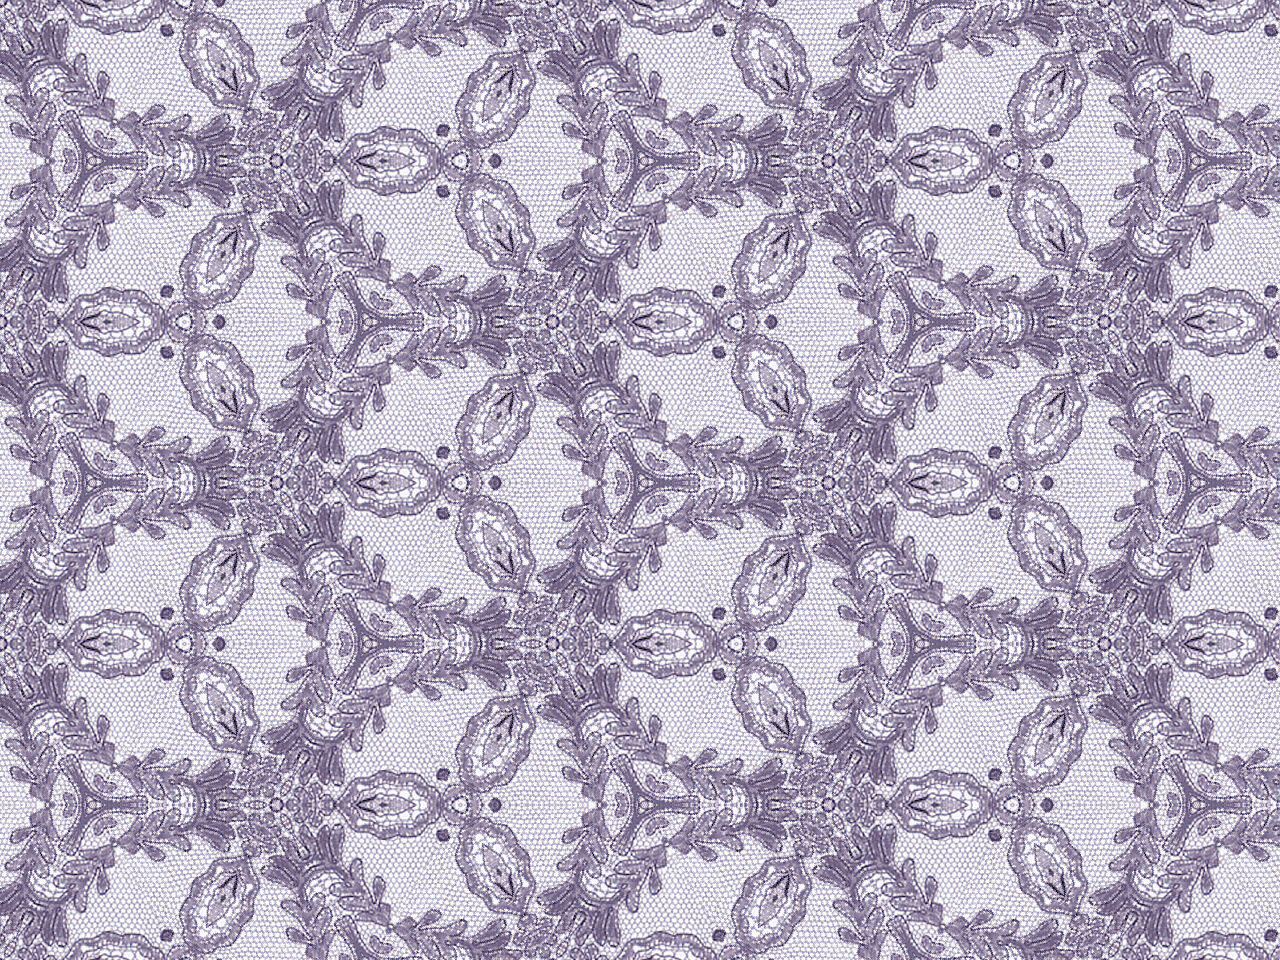 Of Lace Fine Purple Over White Fabric Background